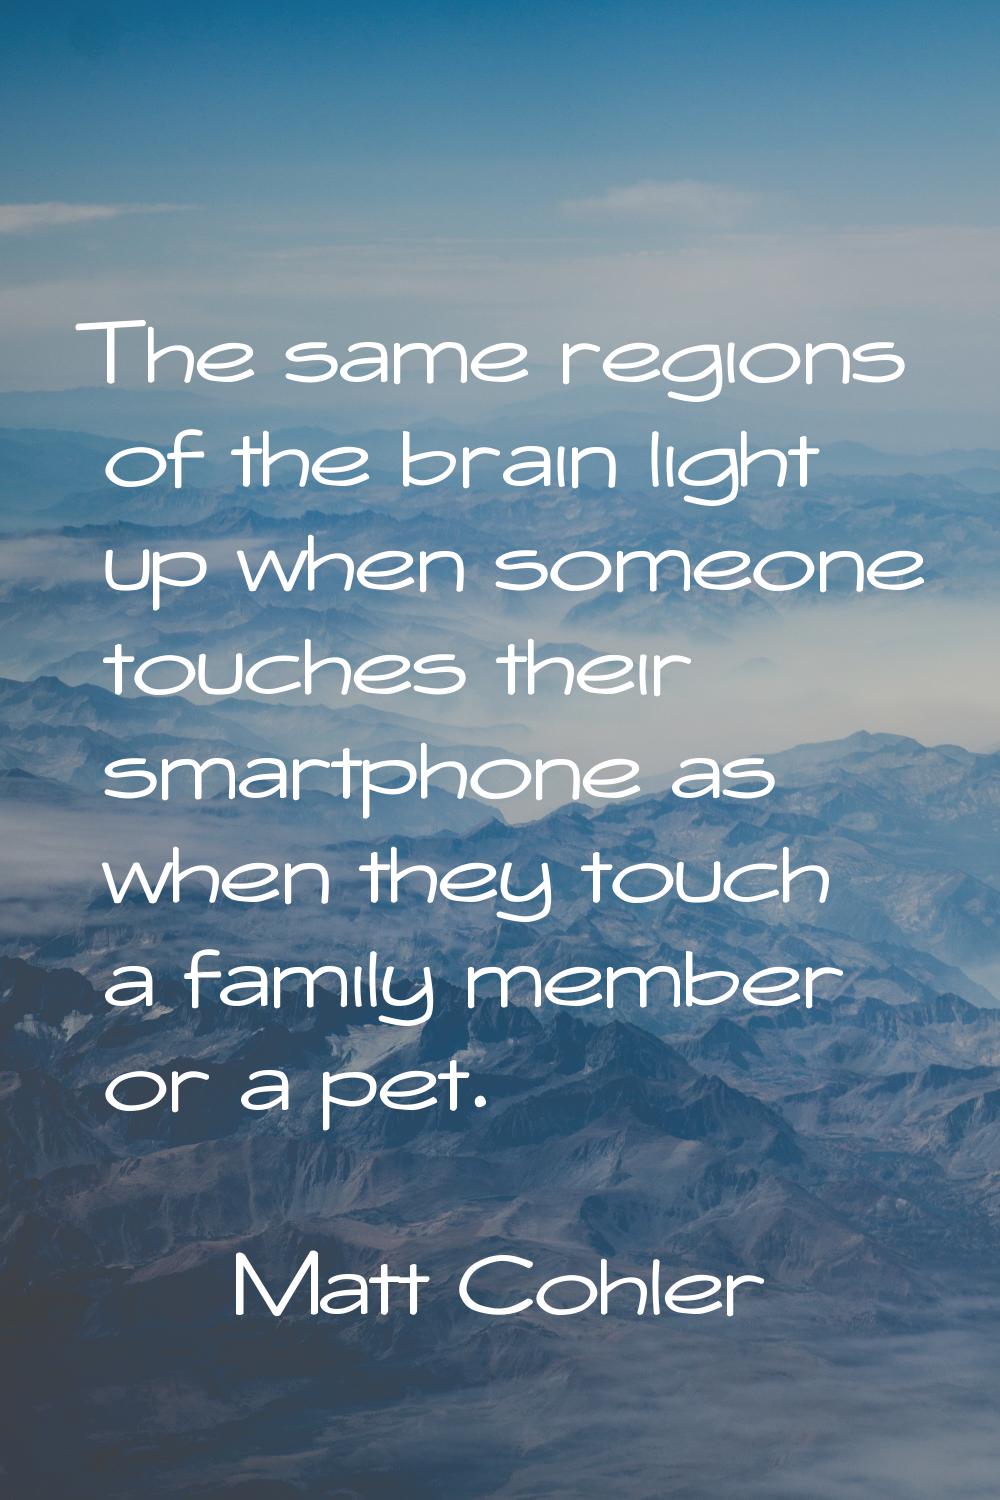 The same regions of the brain light up when someone touches their smartphone as when they touch a f